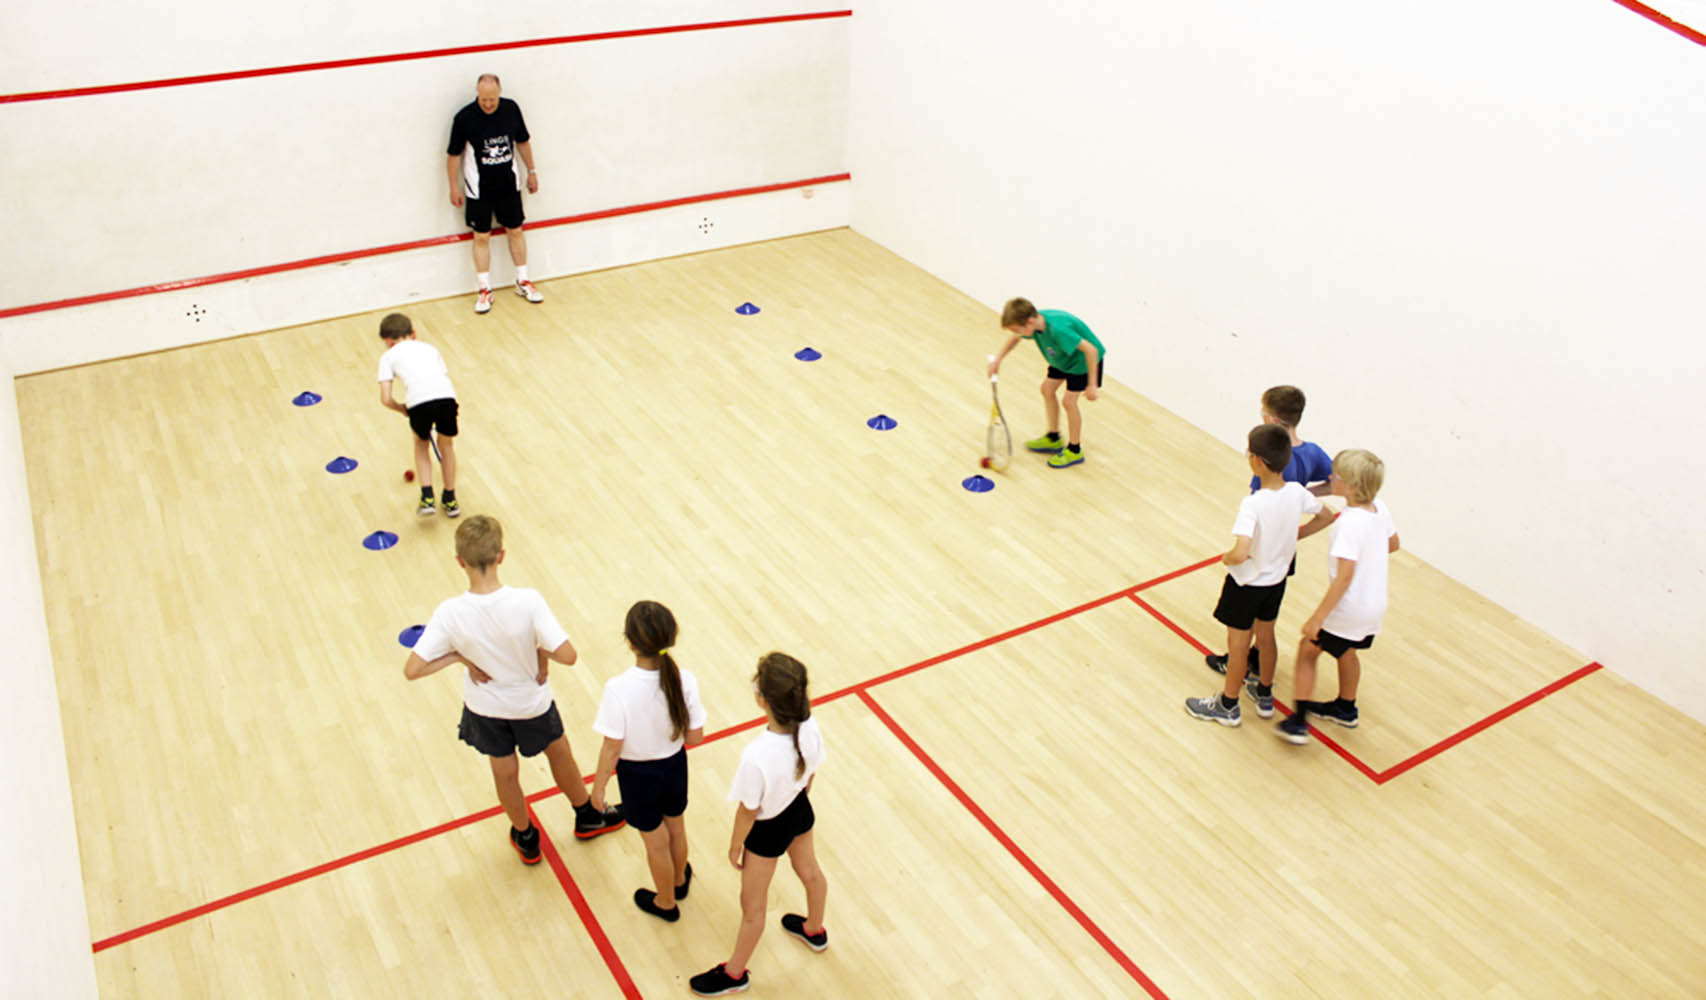 Group of school children playing squash